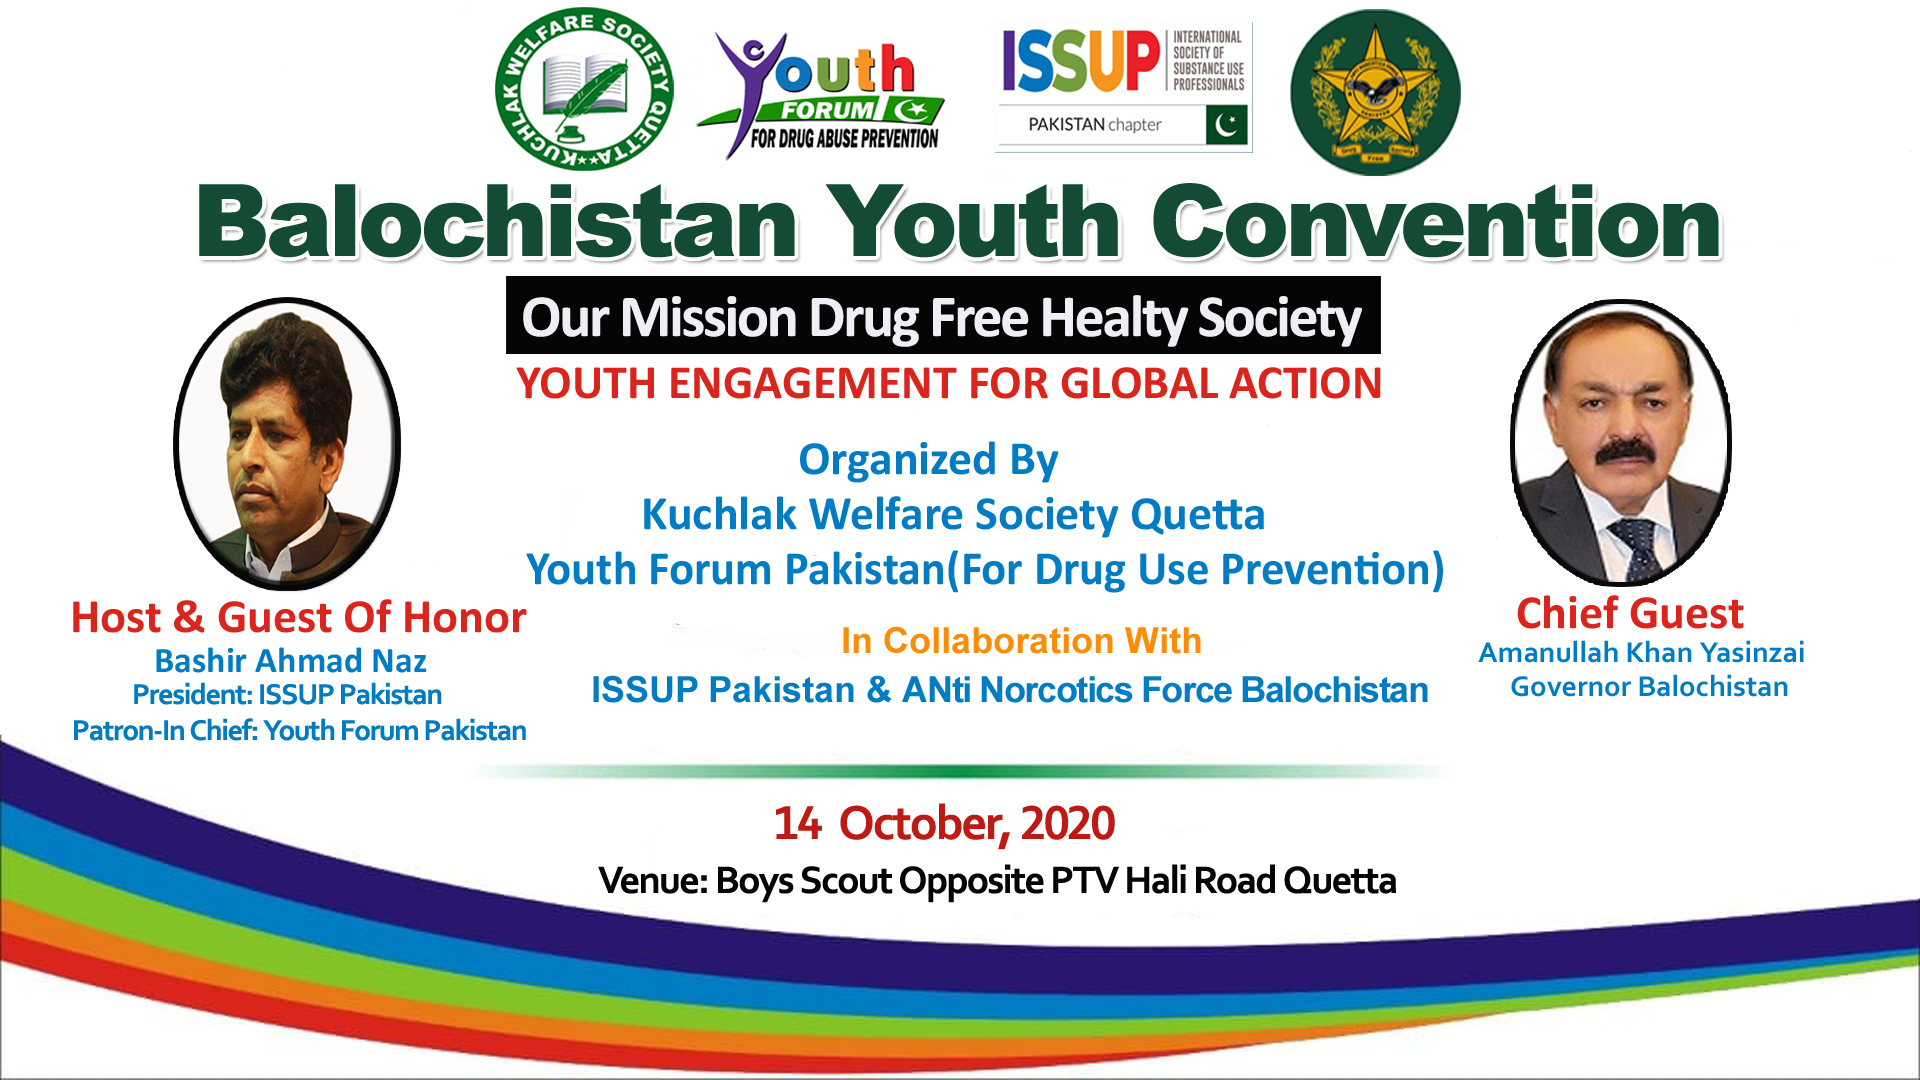 BALOCHISTAN YOUTH CONVENTION BY KUCHLAK WELFARE SOCIETY, YOUTH FORUM PAKISTAN, ISSUP PAKISTAN CHAPTER AND ANF BALOCHISTAN